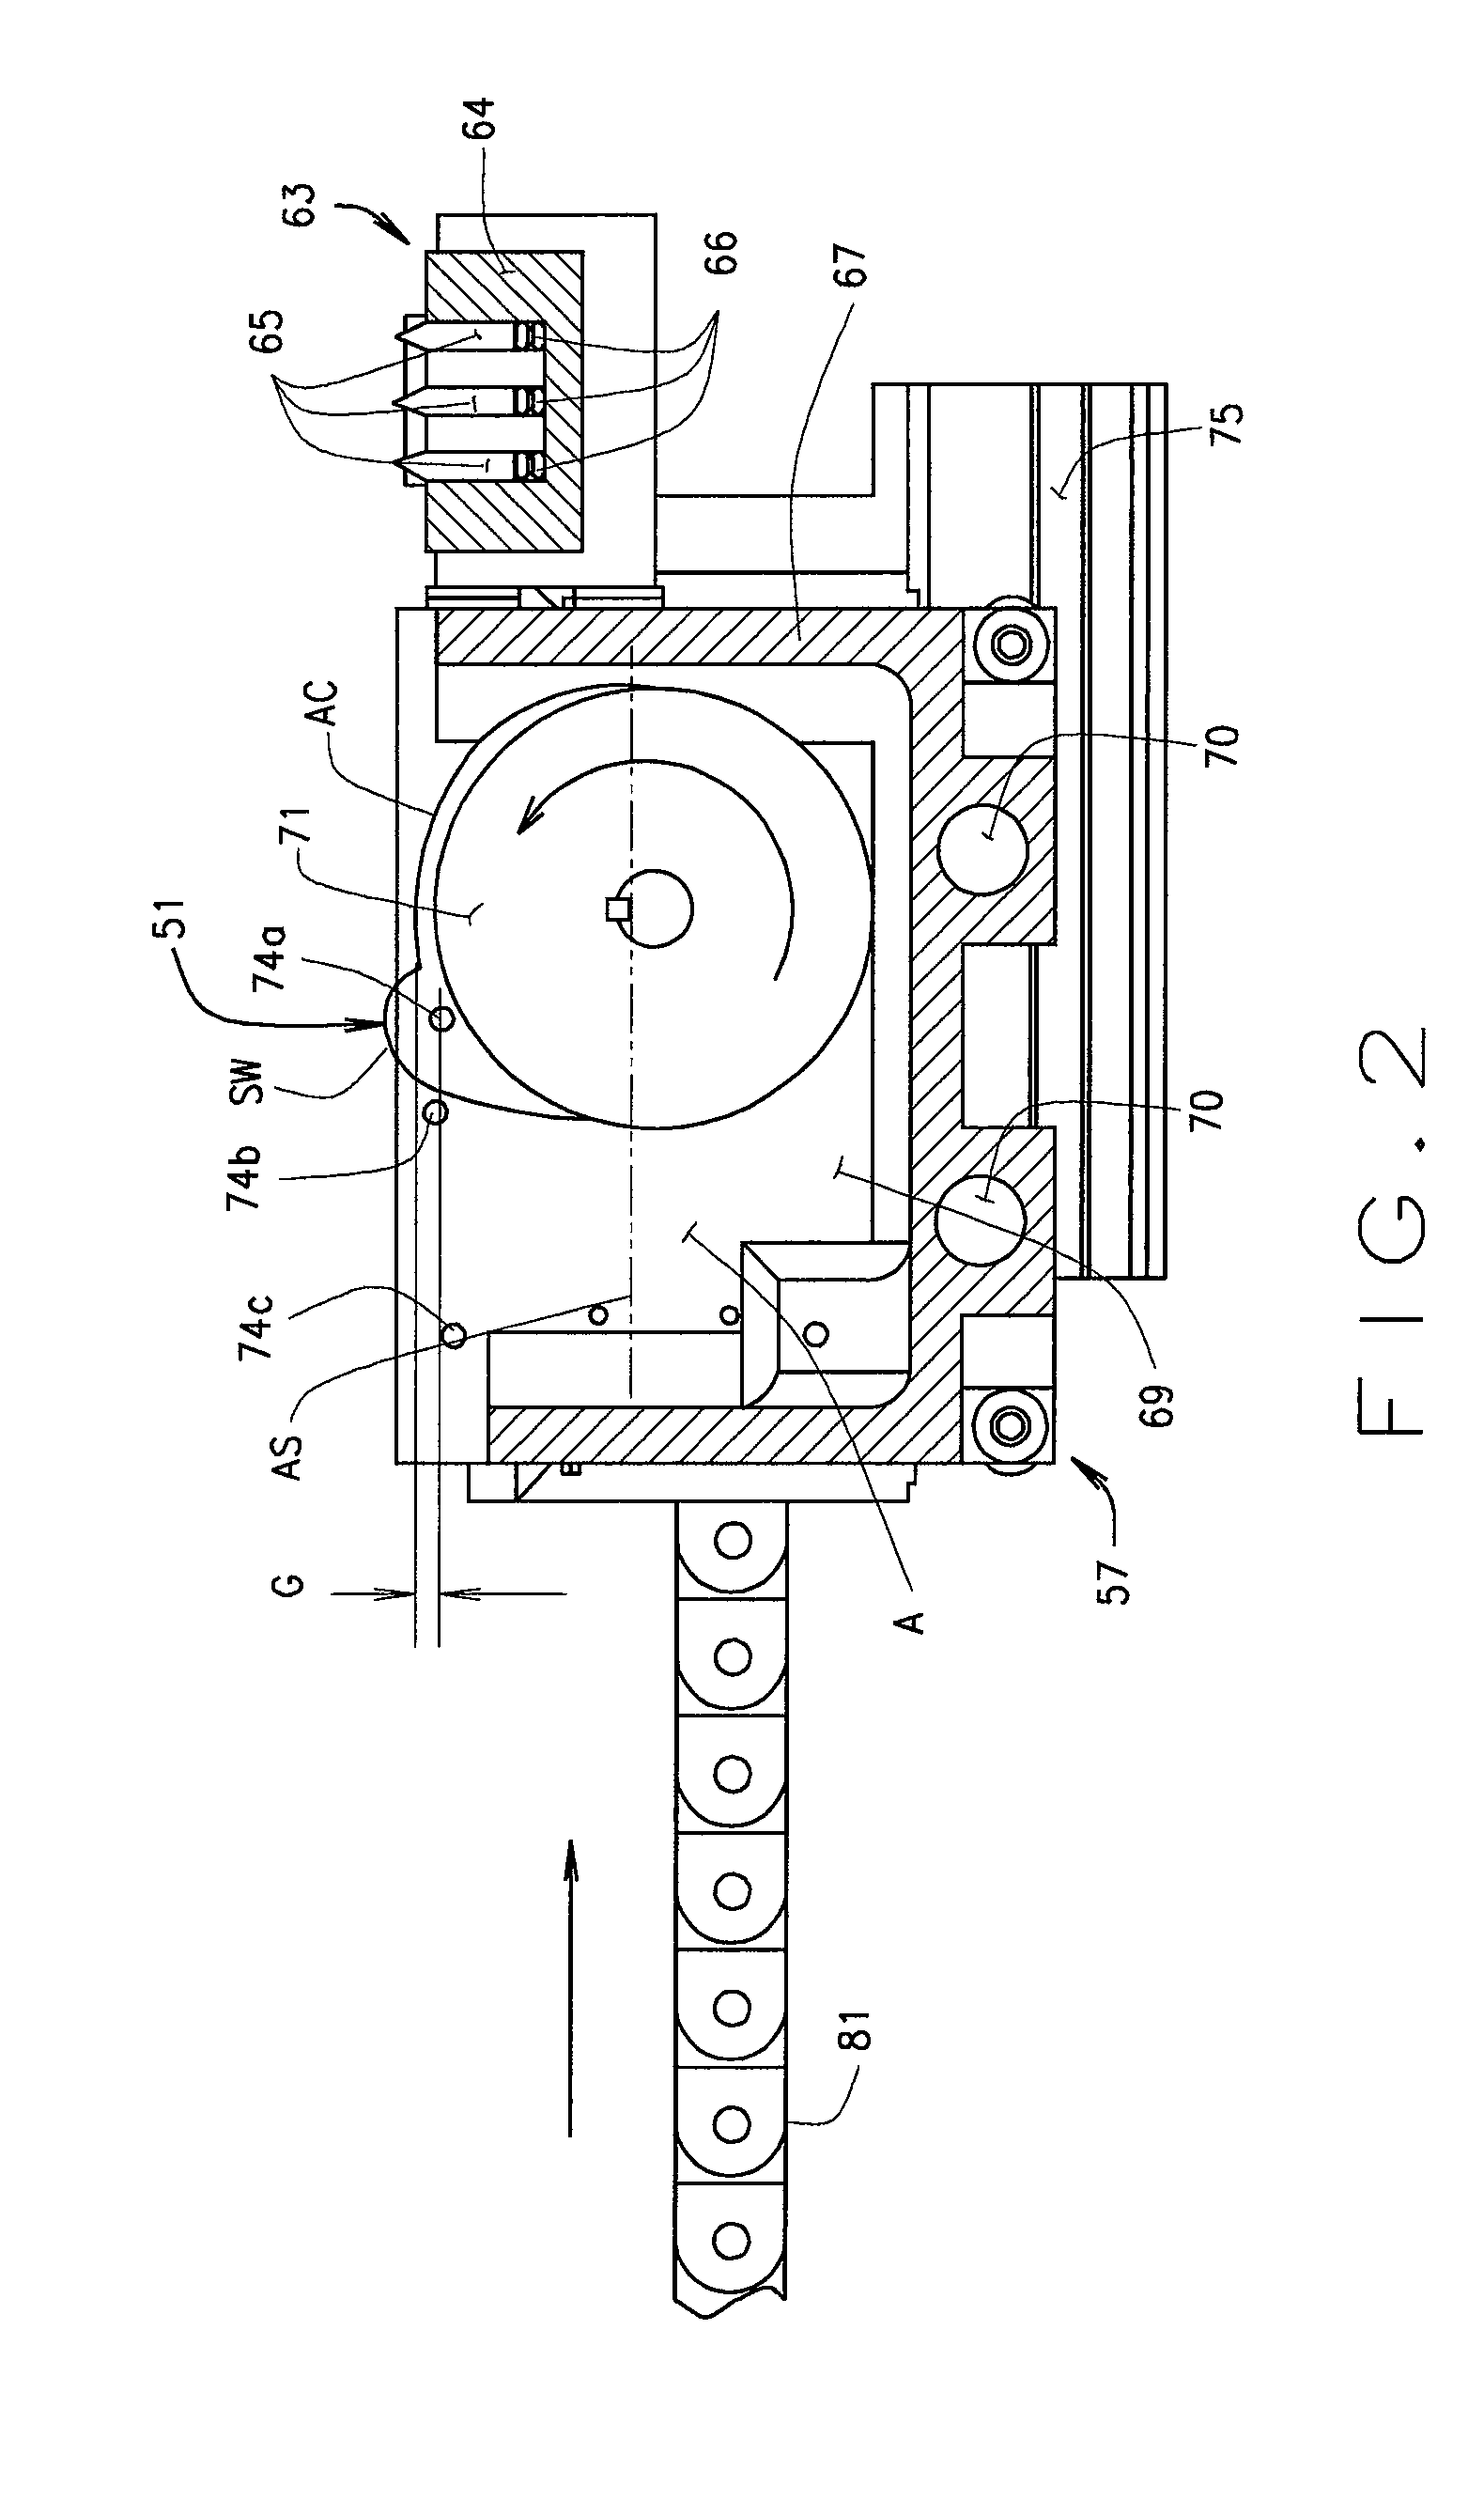 Apparatus for and a method of determining condition of hot melt adhesive for binding of a perfect bound book